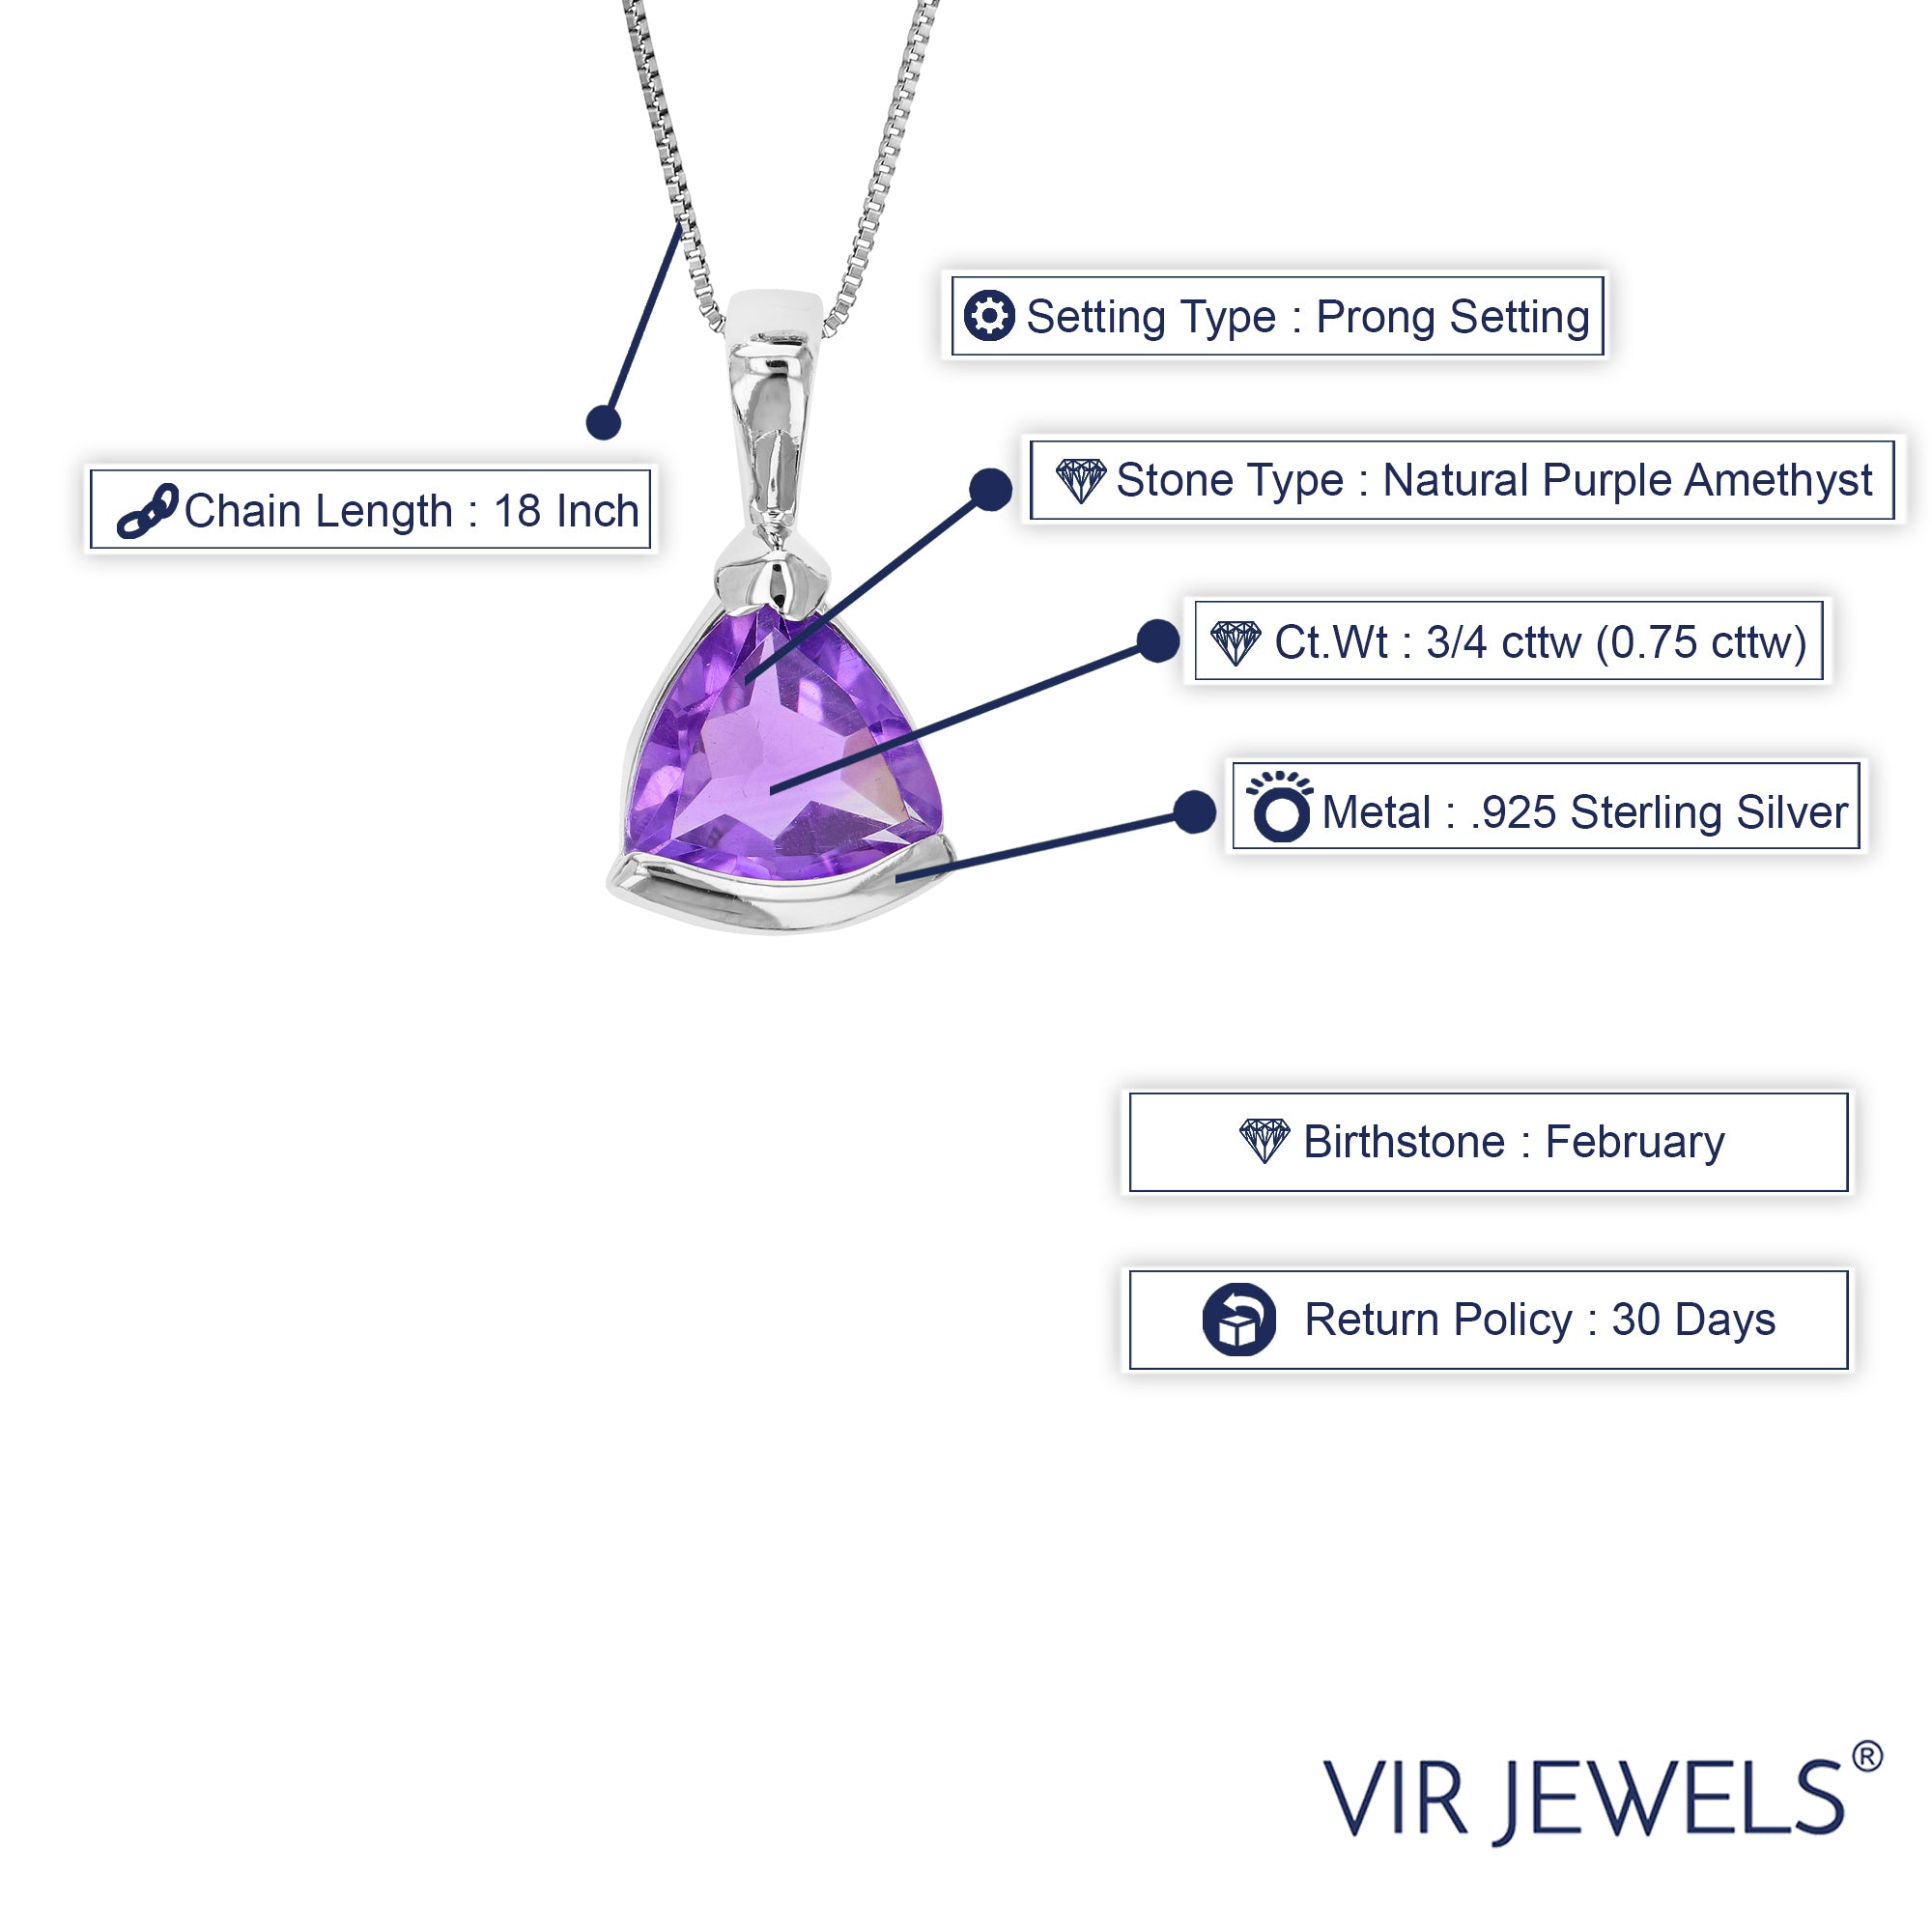 3/4 cttw Pendant Necklace, Purple Amethyst Trillion Pendant Necklace for Women in .925 Sterling Silver with Rhodium, 18 Inch Chain, Channel Setting